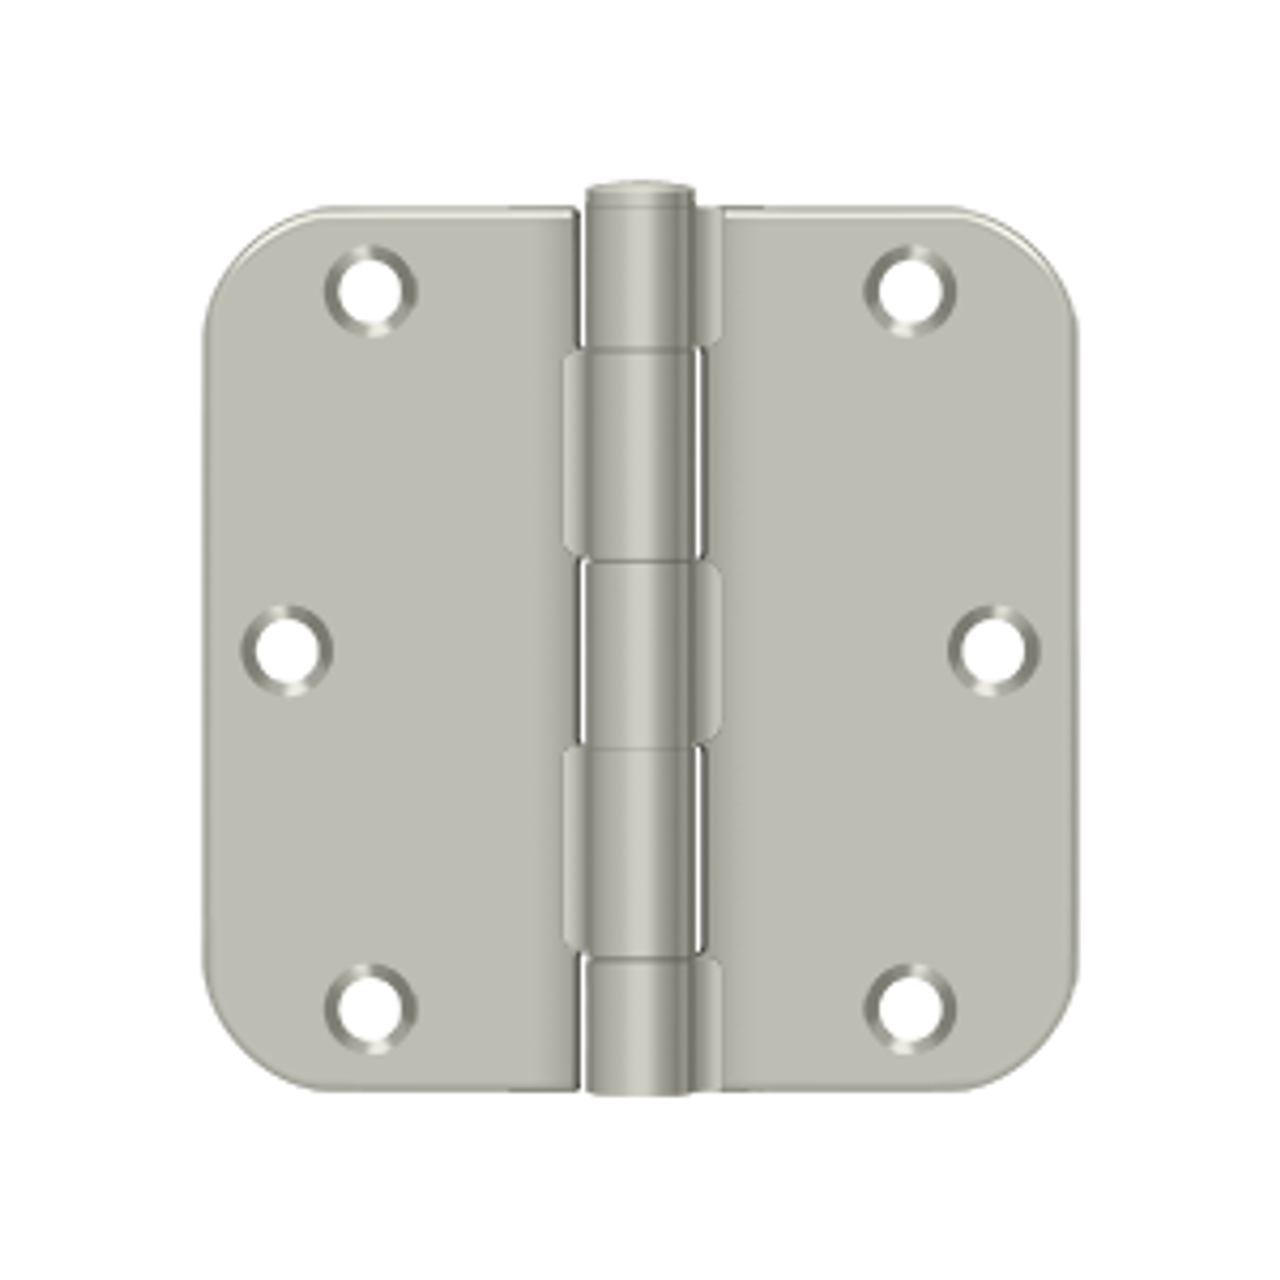 Deltana S35R5 3-1/2" X 3-1/2" X 5/8" RADIUS HINGE, RESIDENTIAL THICKNESS, STEEL MATERIAL